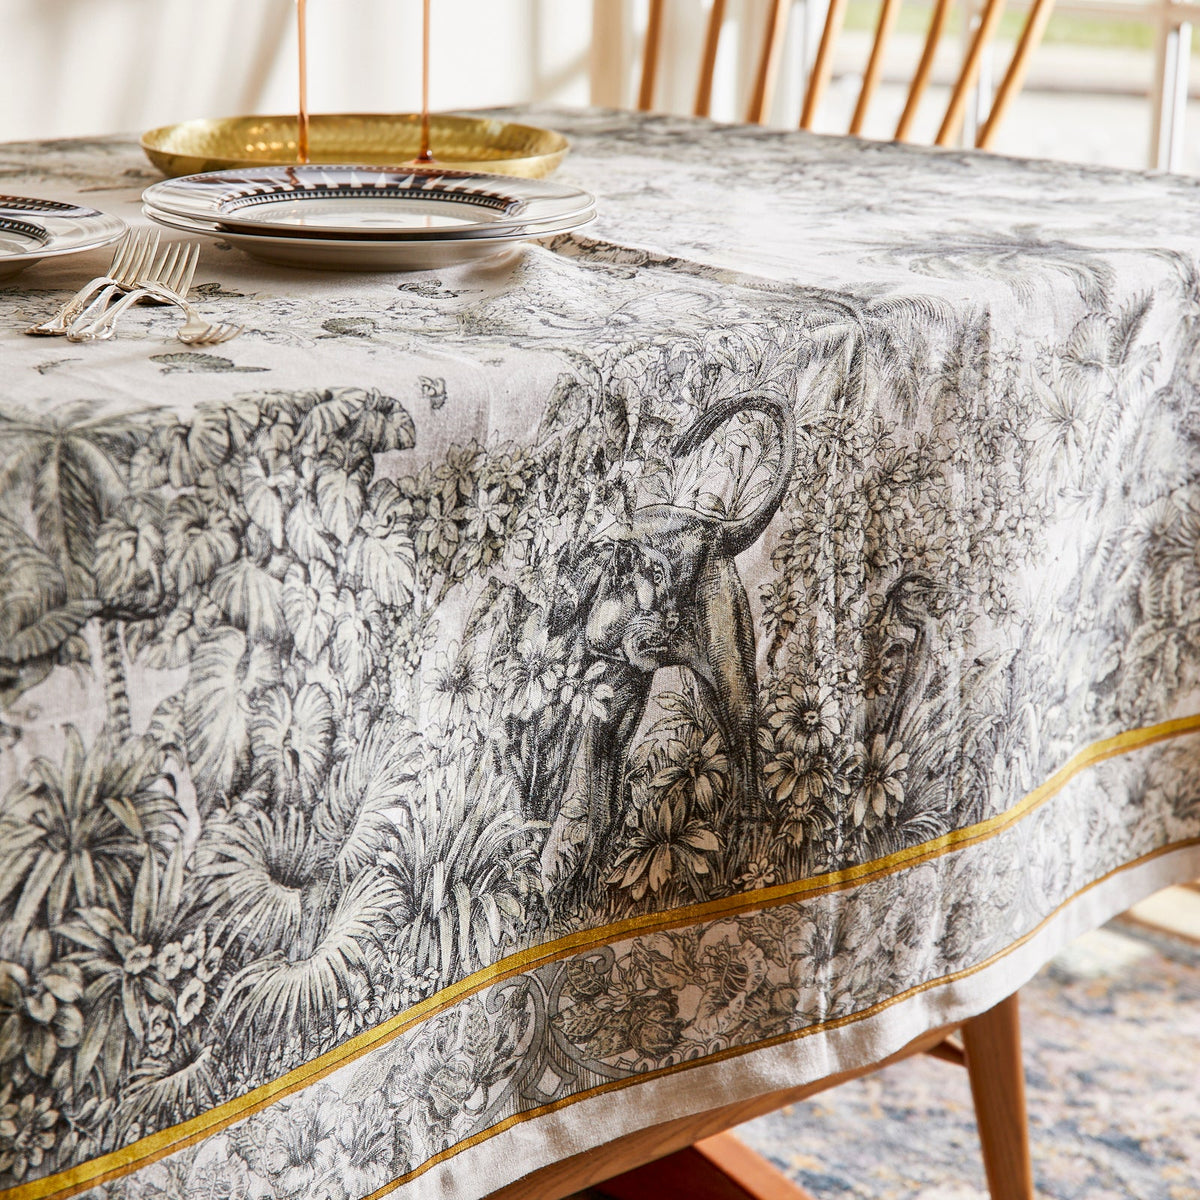 A black and white Morocco Linen Tablecloth with a floral pattern made of linen, by TTT.